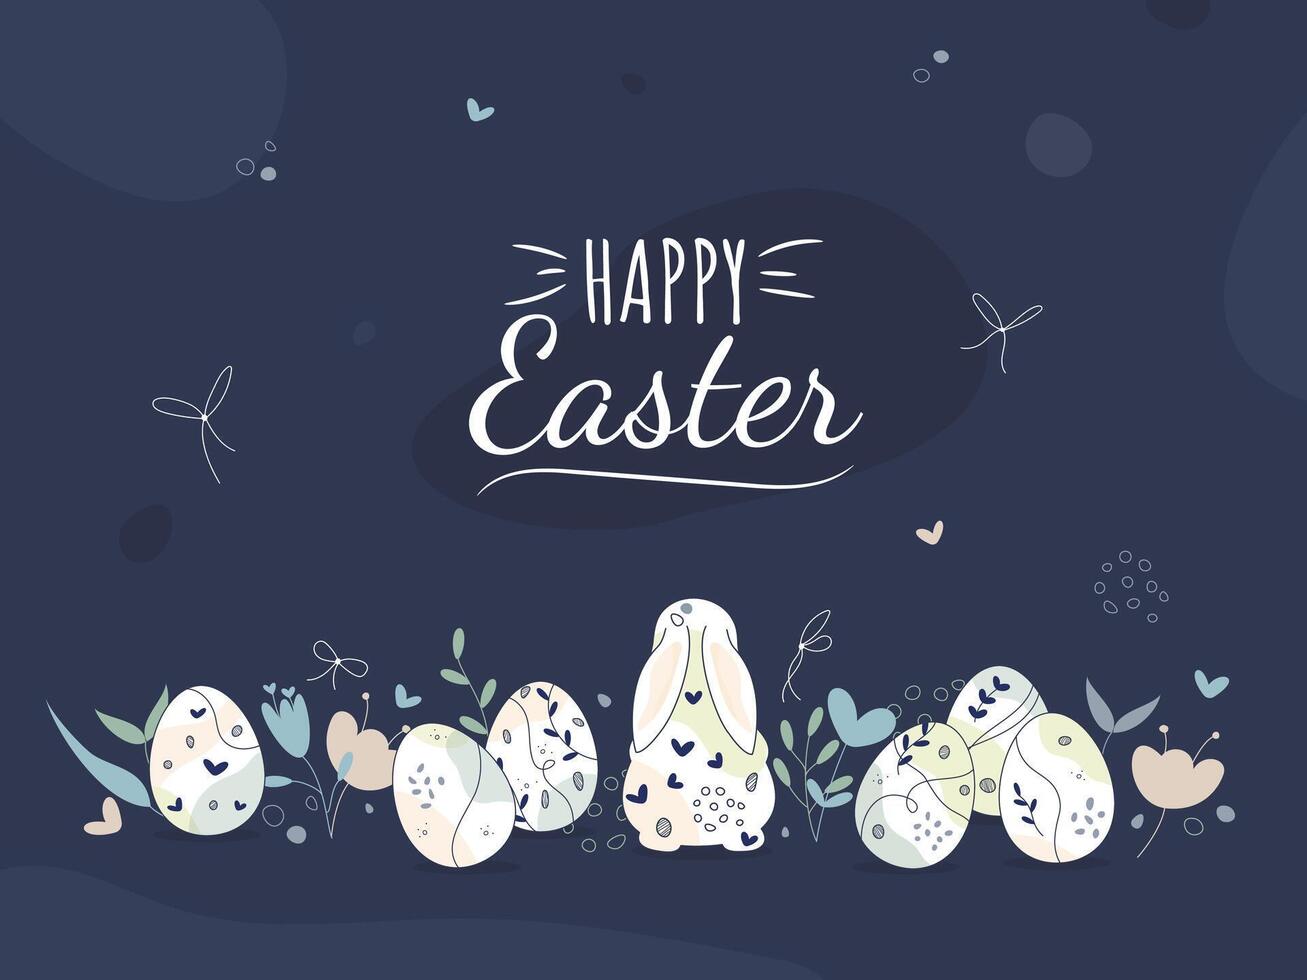 Happy Easter greeting Card with festive bunnies and eggs. Simple Floral pattern on a dark background. Vector editable stroke design for banner, background, card